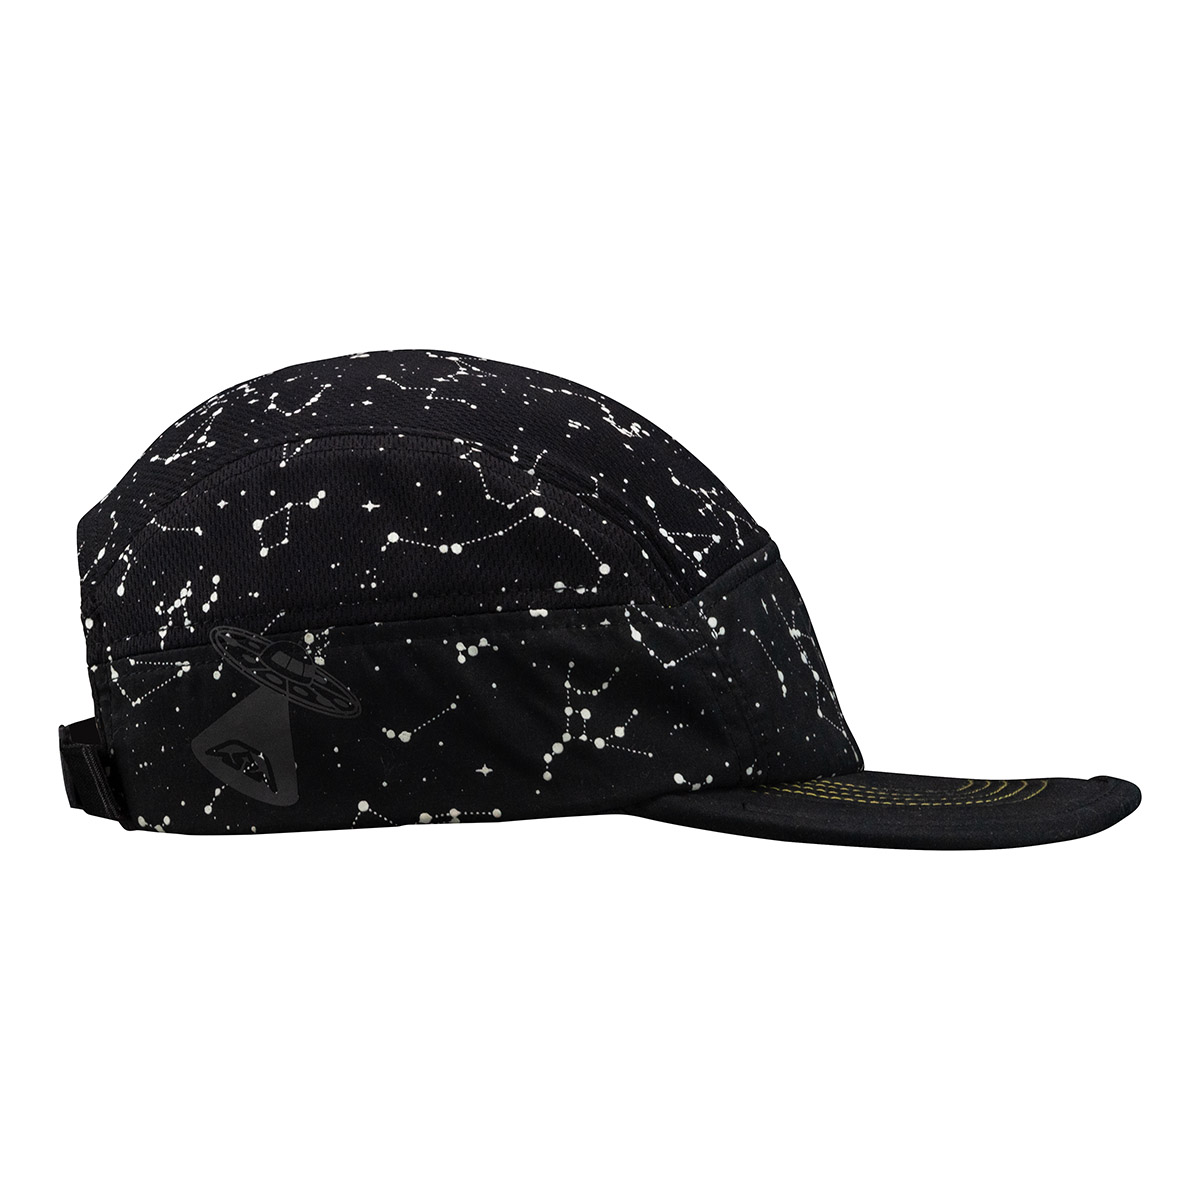 Nathan HyperNight Runner's Cap, , large image number null